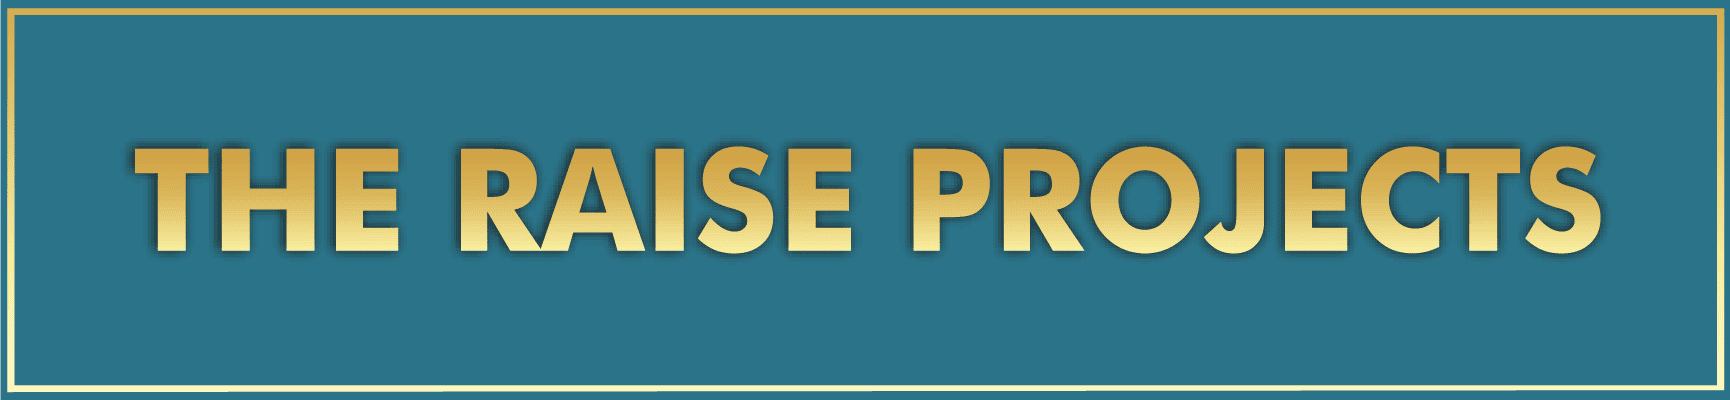 The Raise Project